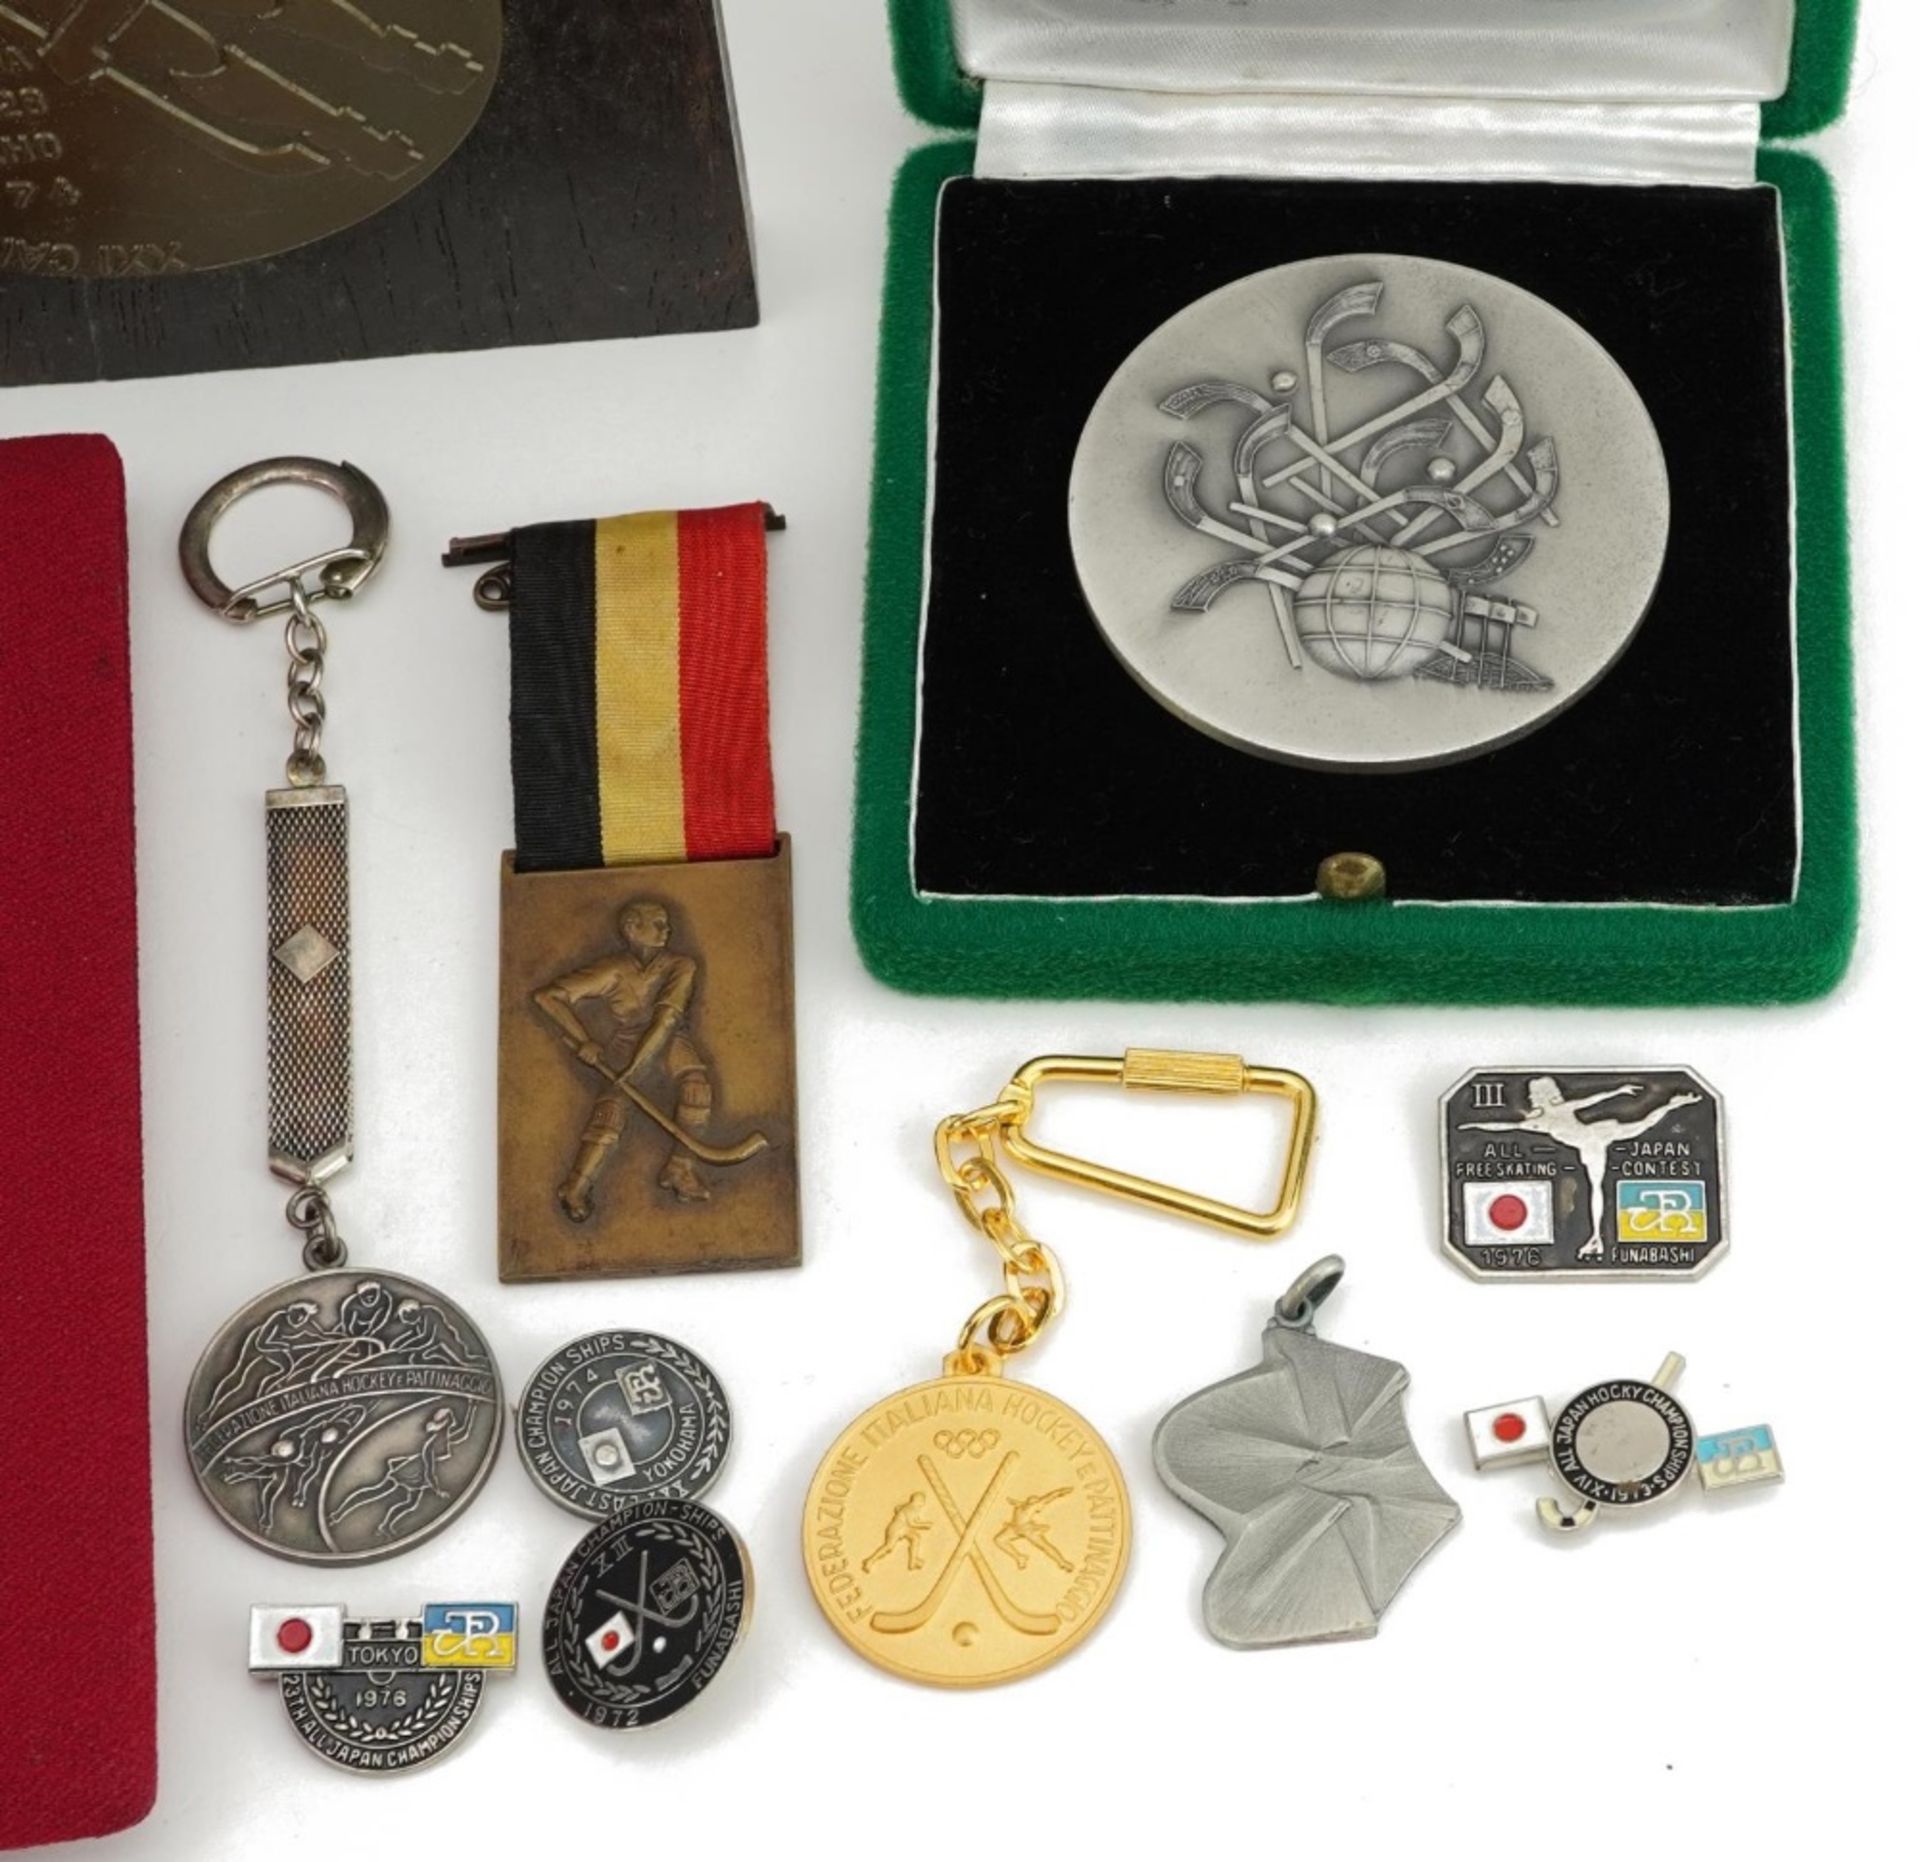 Hockey World Championship memorabilia including 1976 silver medal, silver keyring and World - Image 4 of 5